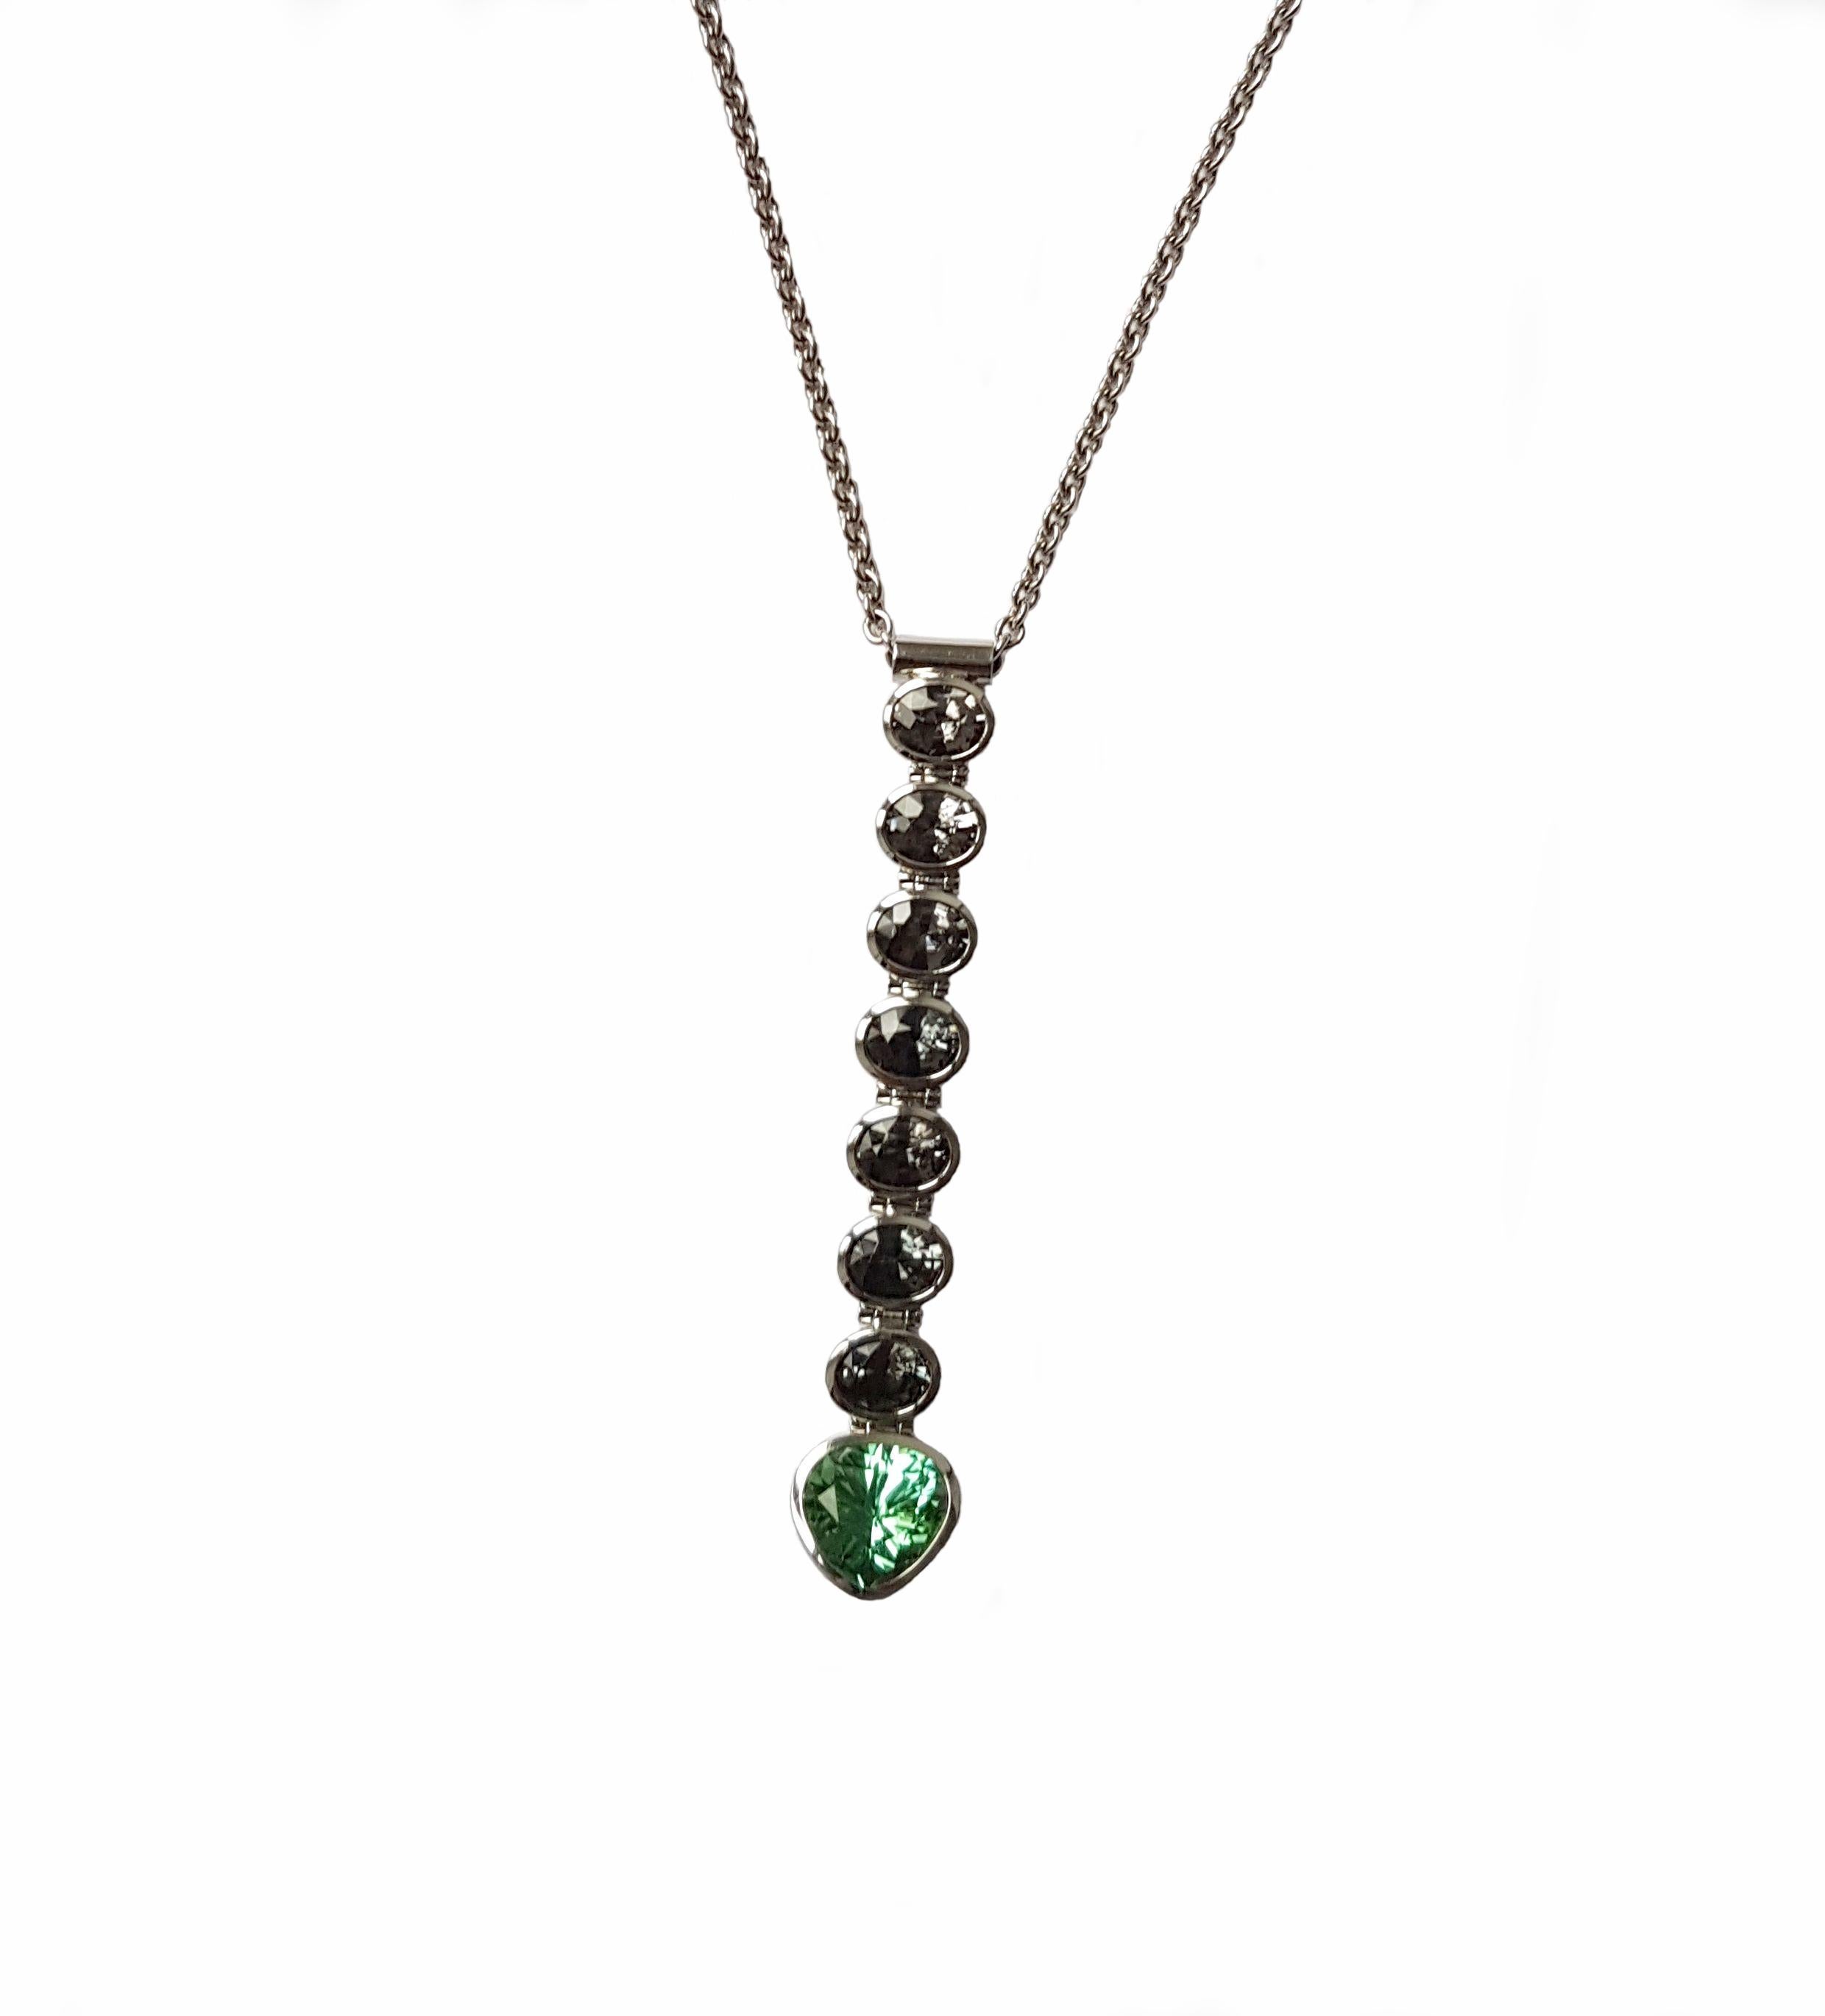 Stunning multi gemstone pendant made of 950/0 platinum with a beautiful mint-green colored faceted tourmaline of 4.81 carats and 7 oval spinels with a total of 8.78 carats. The chain is also 950/0 Platinum and can be adjusted in length.
Very